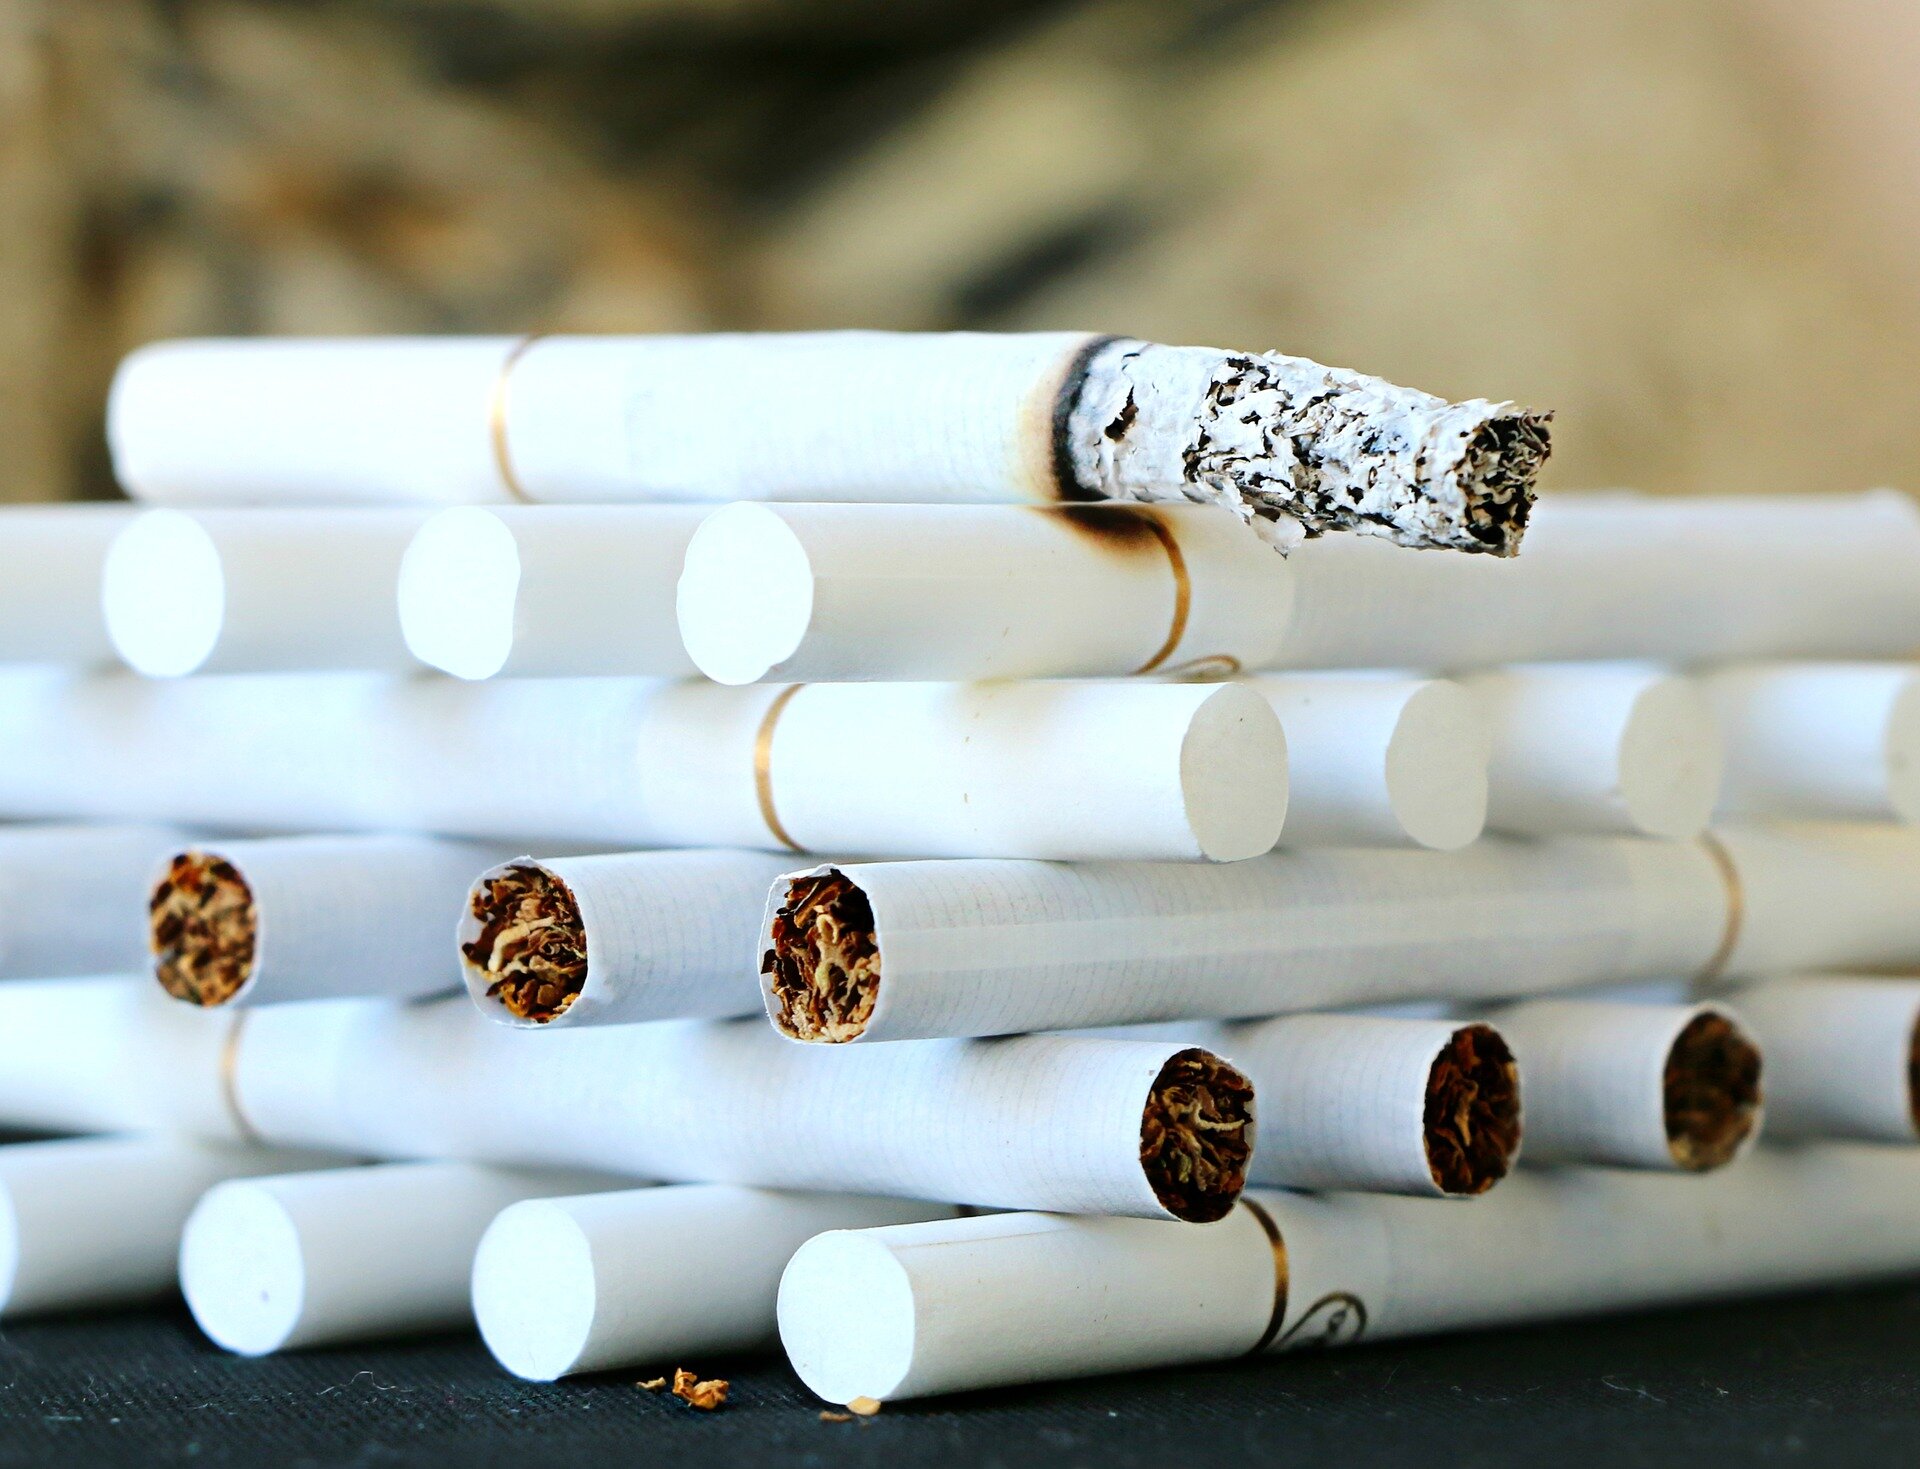 US significantly reduces nicotine content in cigarettes: Report